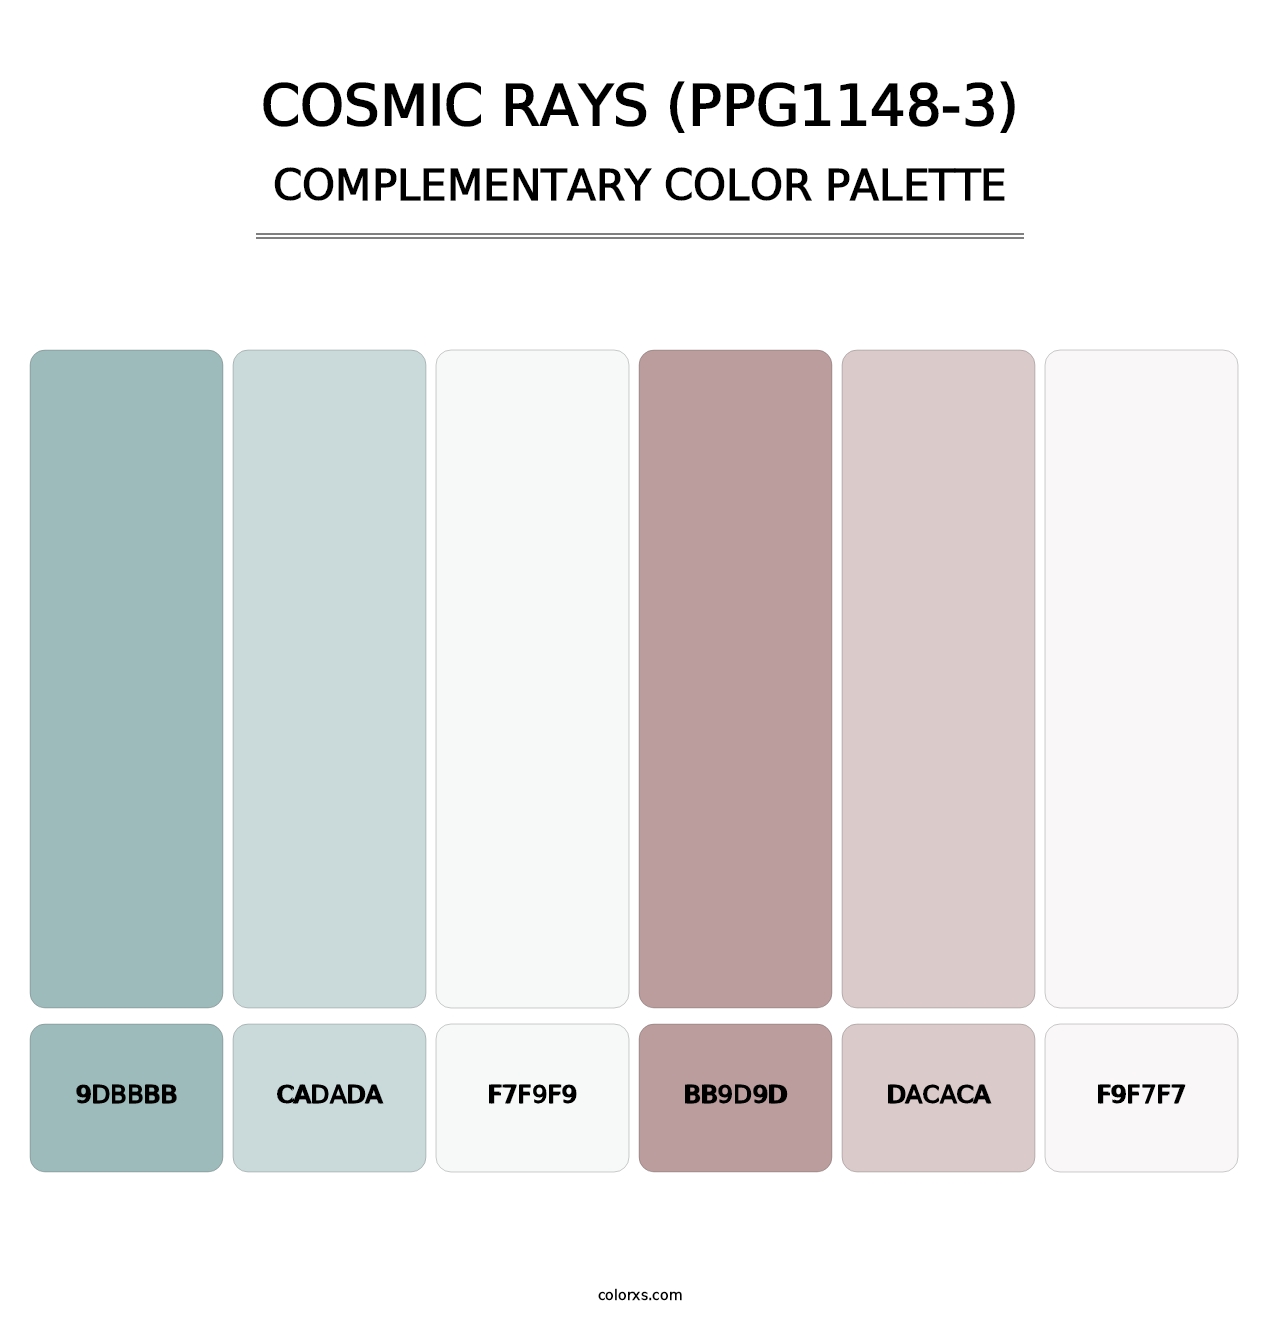 Cosmic Rays (PPG1148-3) - Complementary Color Palette